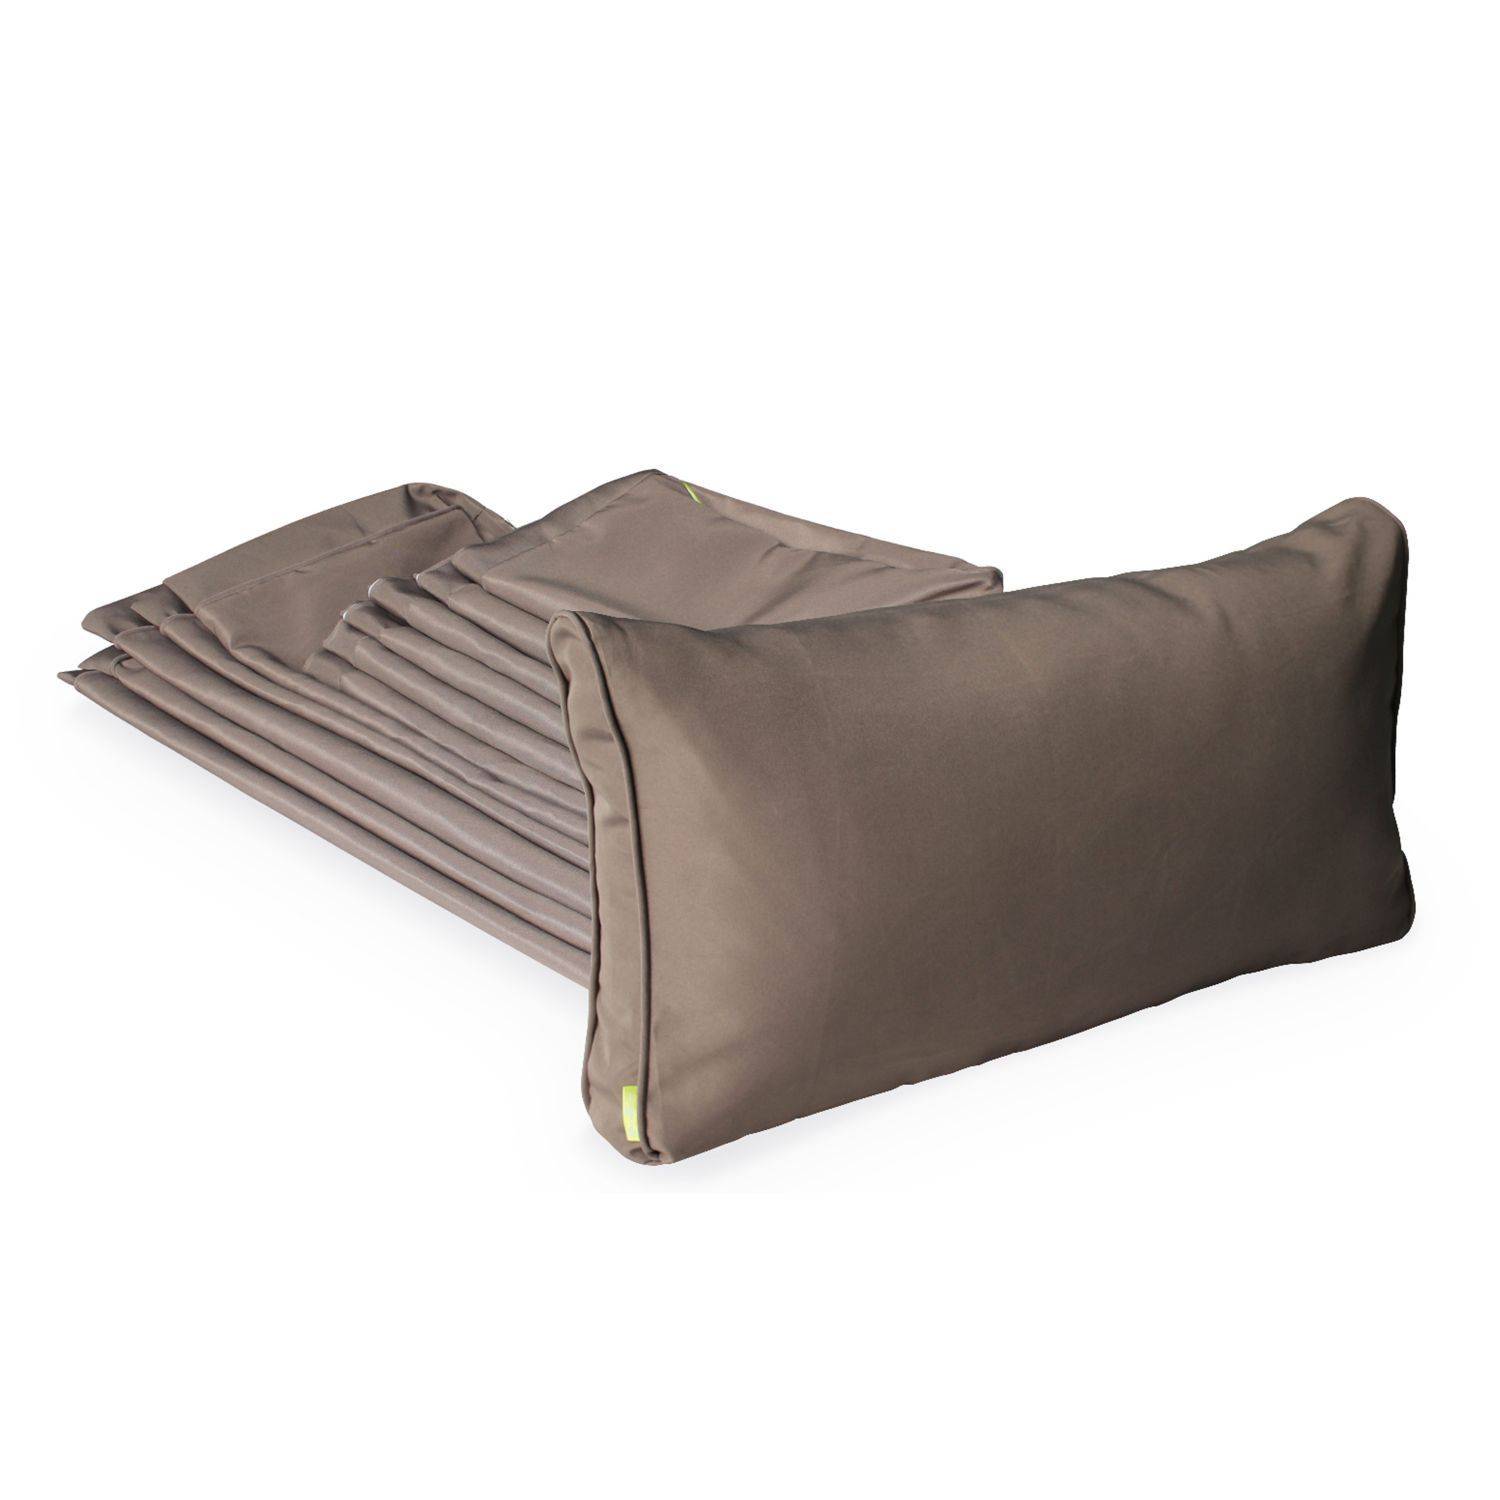 Complete set of cushion covers - Caligari - Beige-Brown Photo2